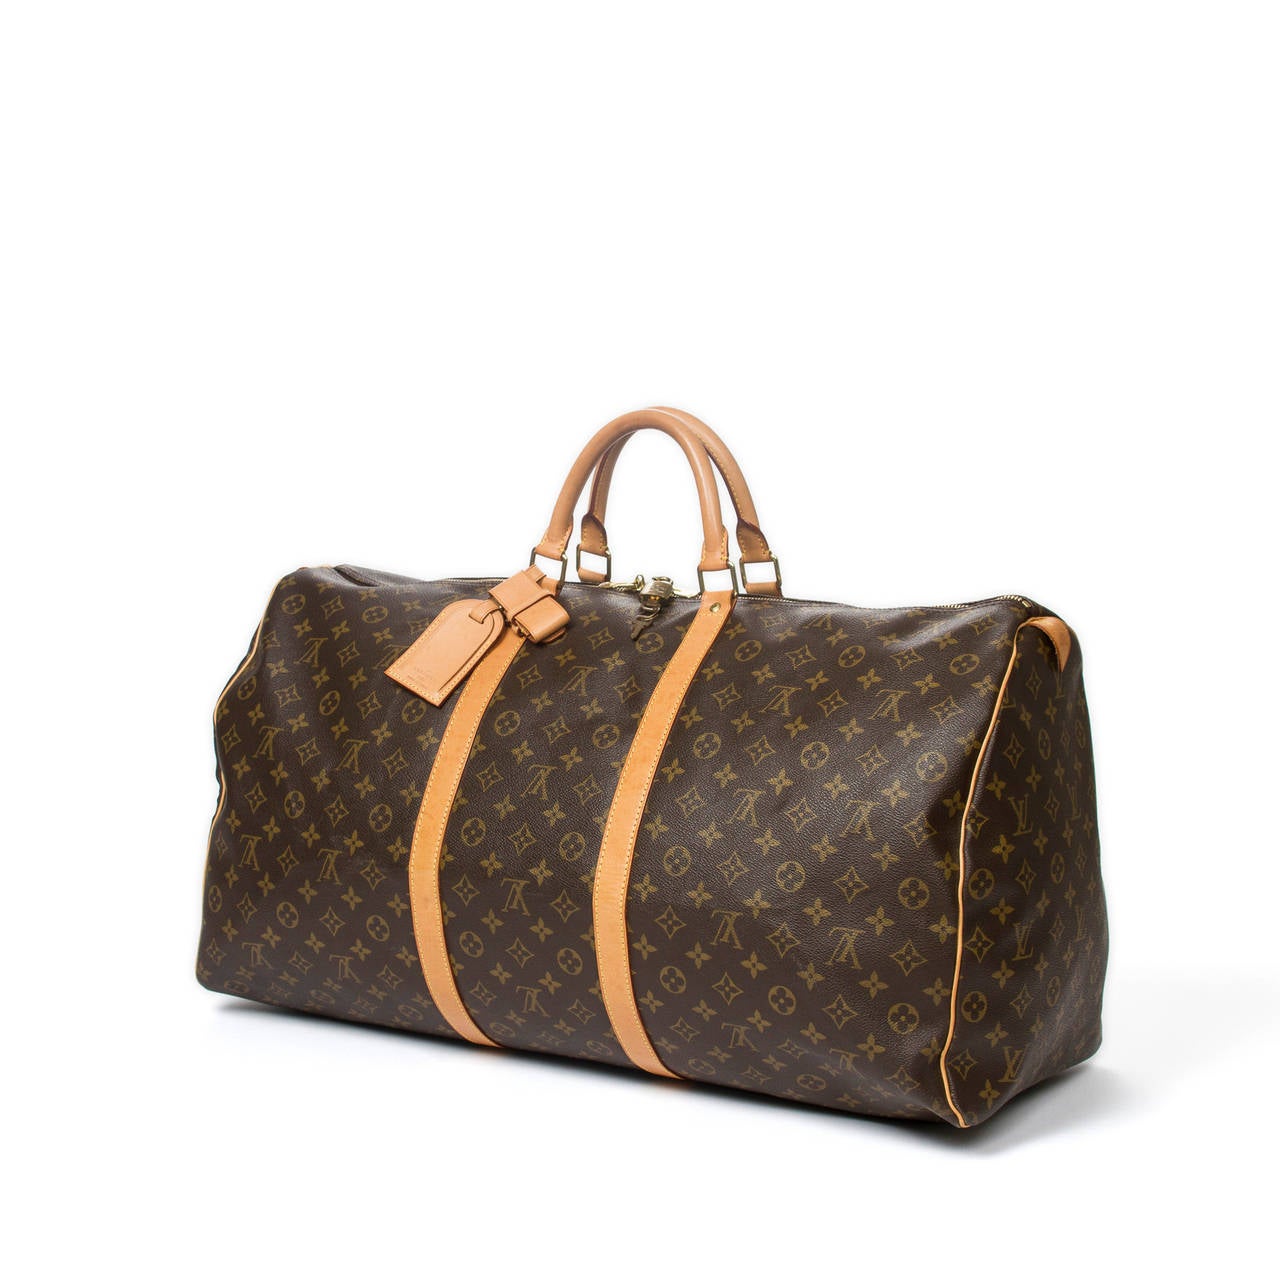 Louis Vuitton Keepall 60 in monogram canvas with vachetta leather handles, luggage tag, handle strap, cadenas and keys, golden brass hardware. Brown canvas lined interior. Model of 2001. Date Code FL0011. Beautiful patina on the leather, excellent